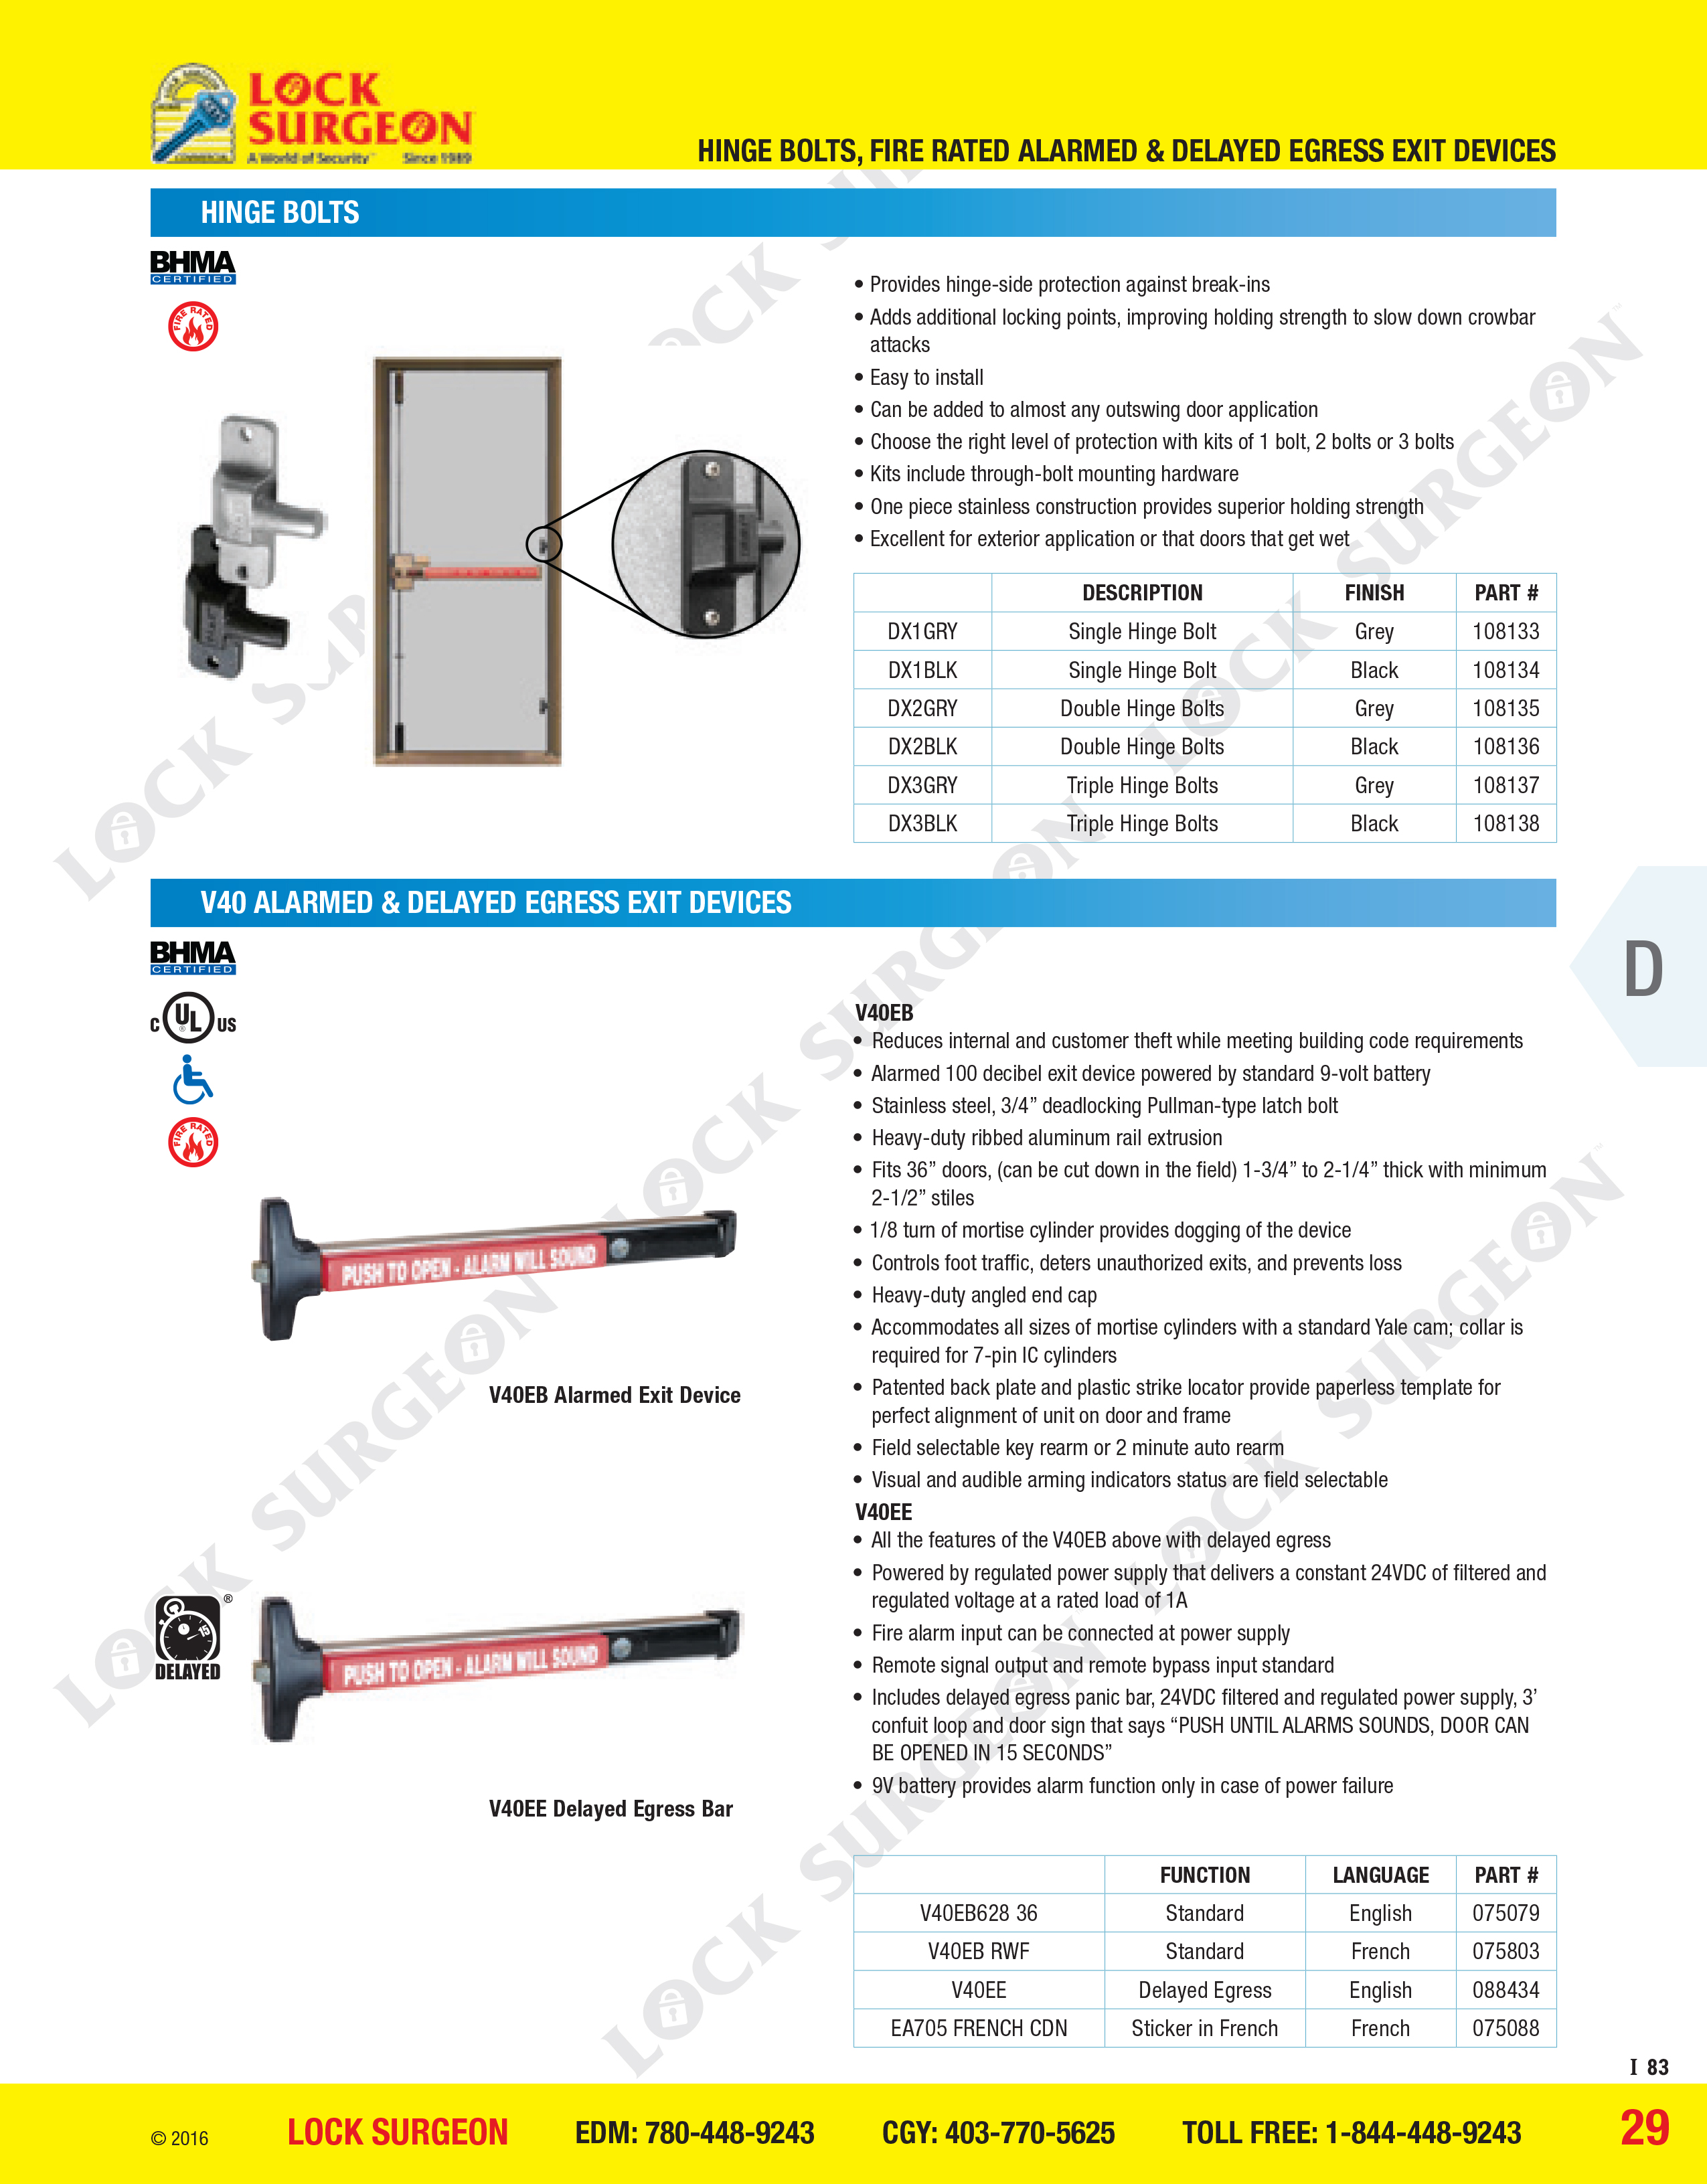 Detex Hinge bolts, V40 Alarmed and delayed egress exit devices, fire-rated & alarmed Acheson.